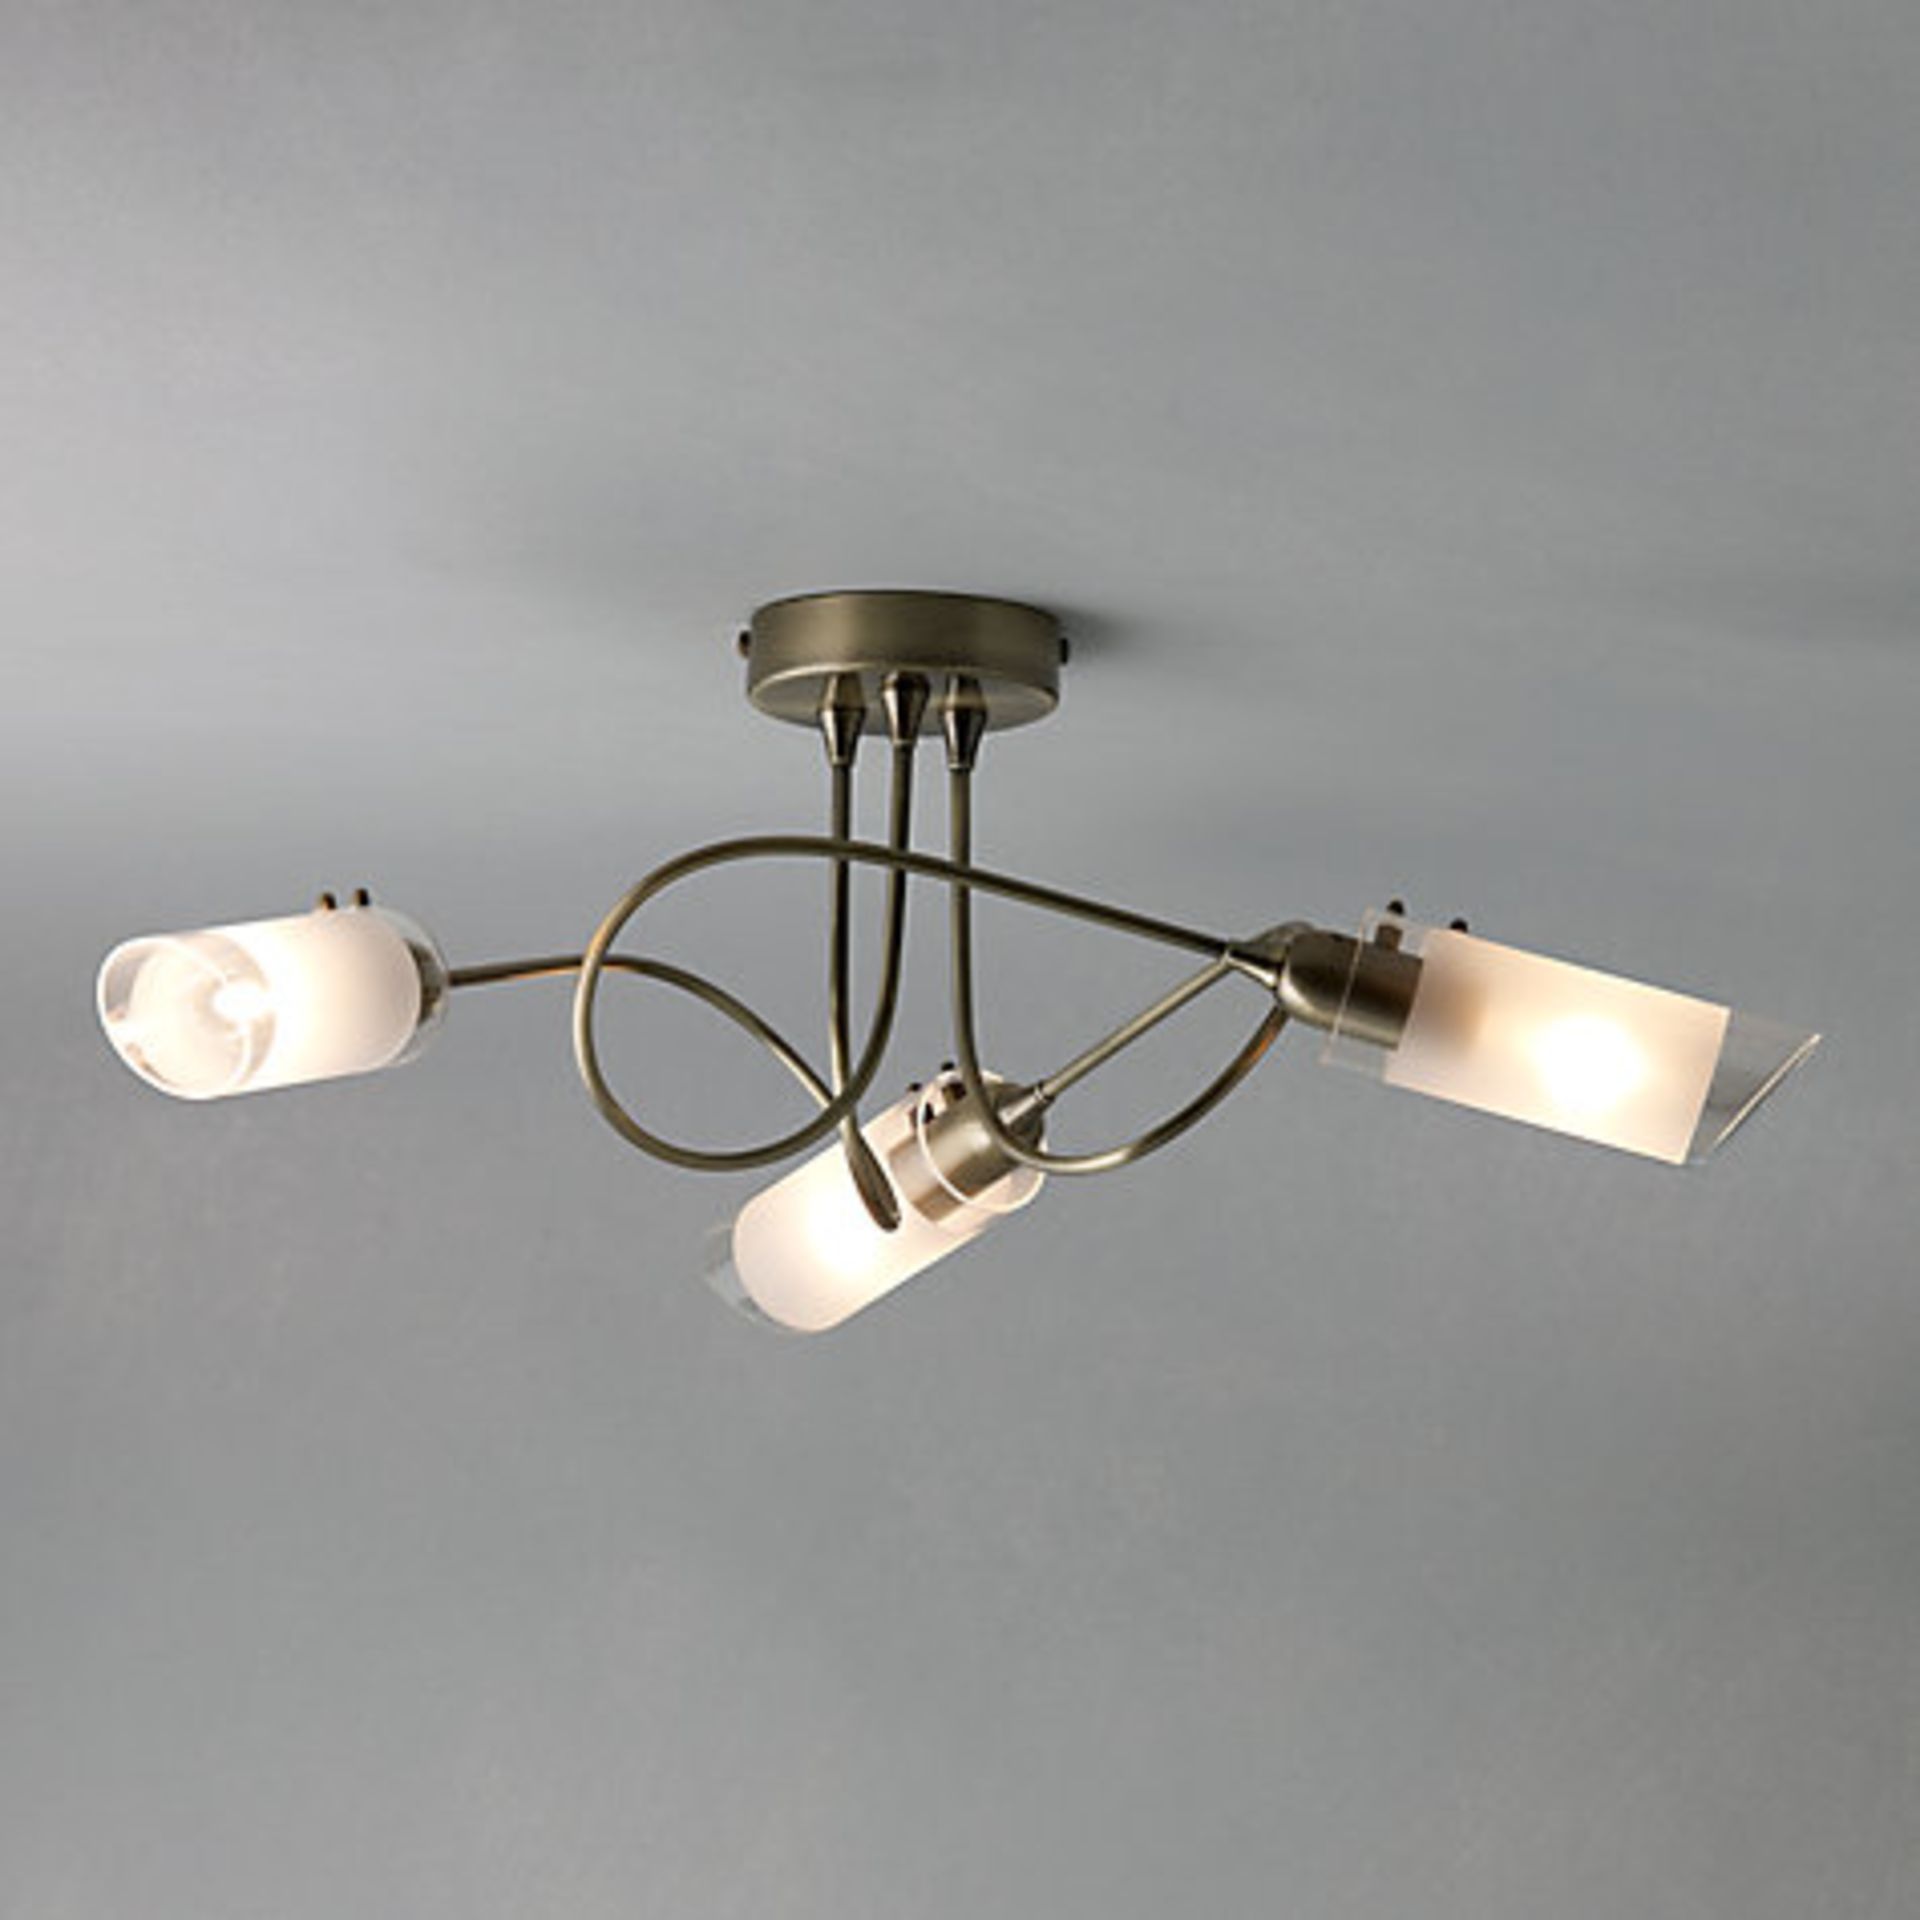 2 x BOXED LIMBO 3 LIGHT CEILING FITTINGS (22.4.16) *PLEASE NOTE THAT THE BID PRICE IS MULTIPLIED